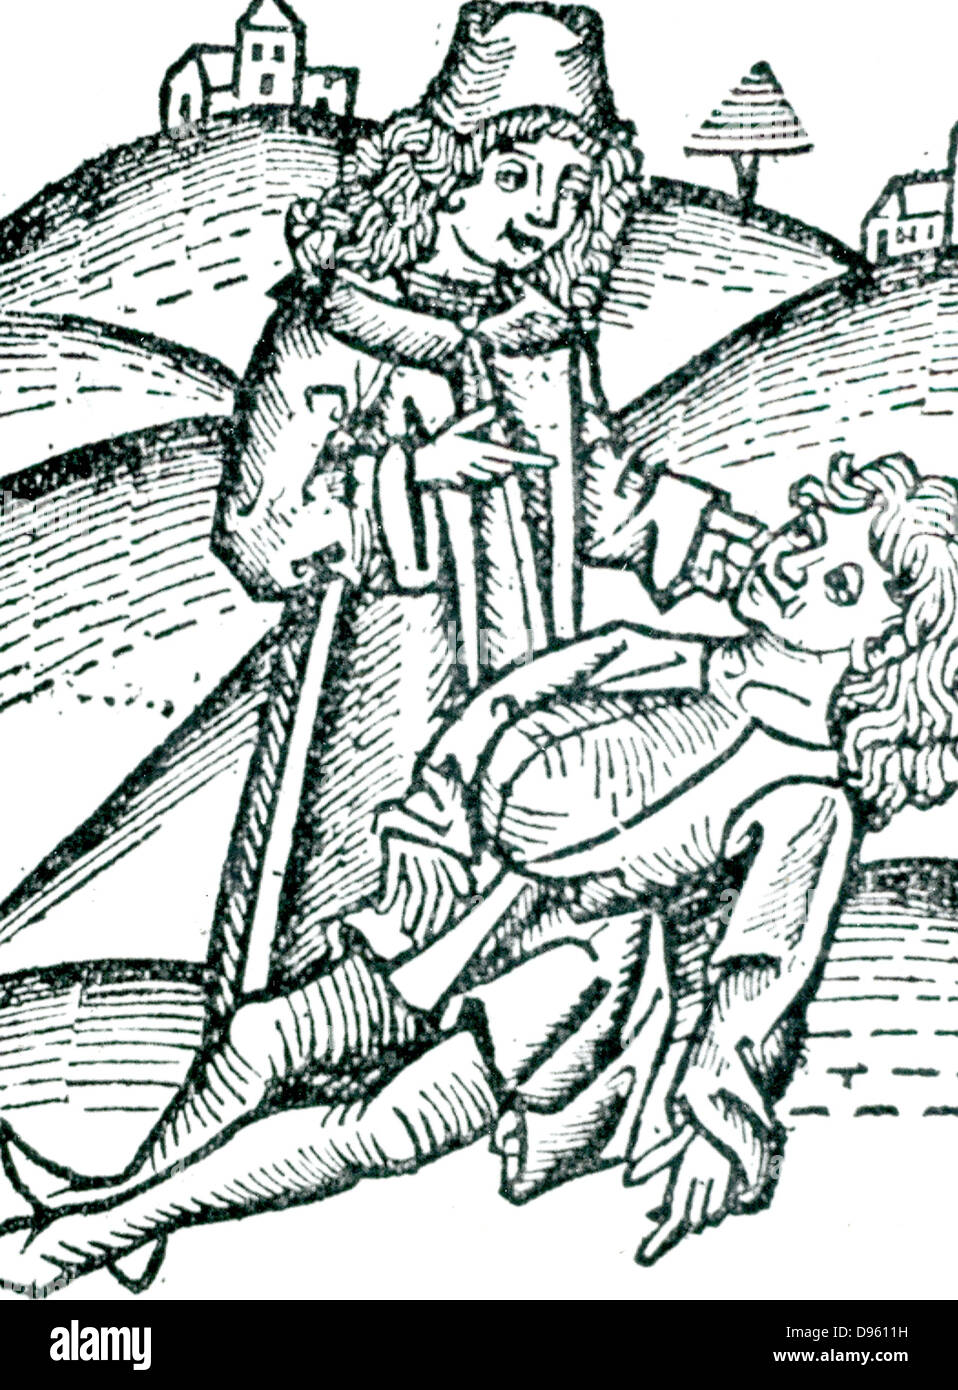 Physician applying a Bezoar stone to a victim of poisoning. The stone was extracted from the gall-bladder or stomach of an animal such as a goat or an antelope.  Bezoar is a corruption of a Persian word meaning counter-poison. From Johannis de Cuba 'Ortus sanitatis', Strasbourt, 1483. Stock Photo